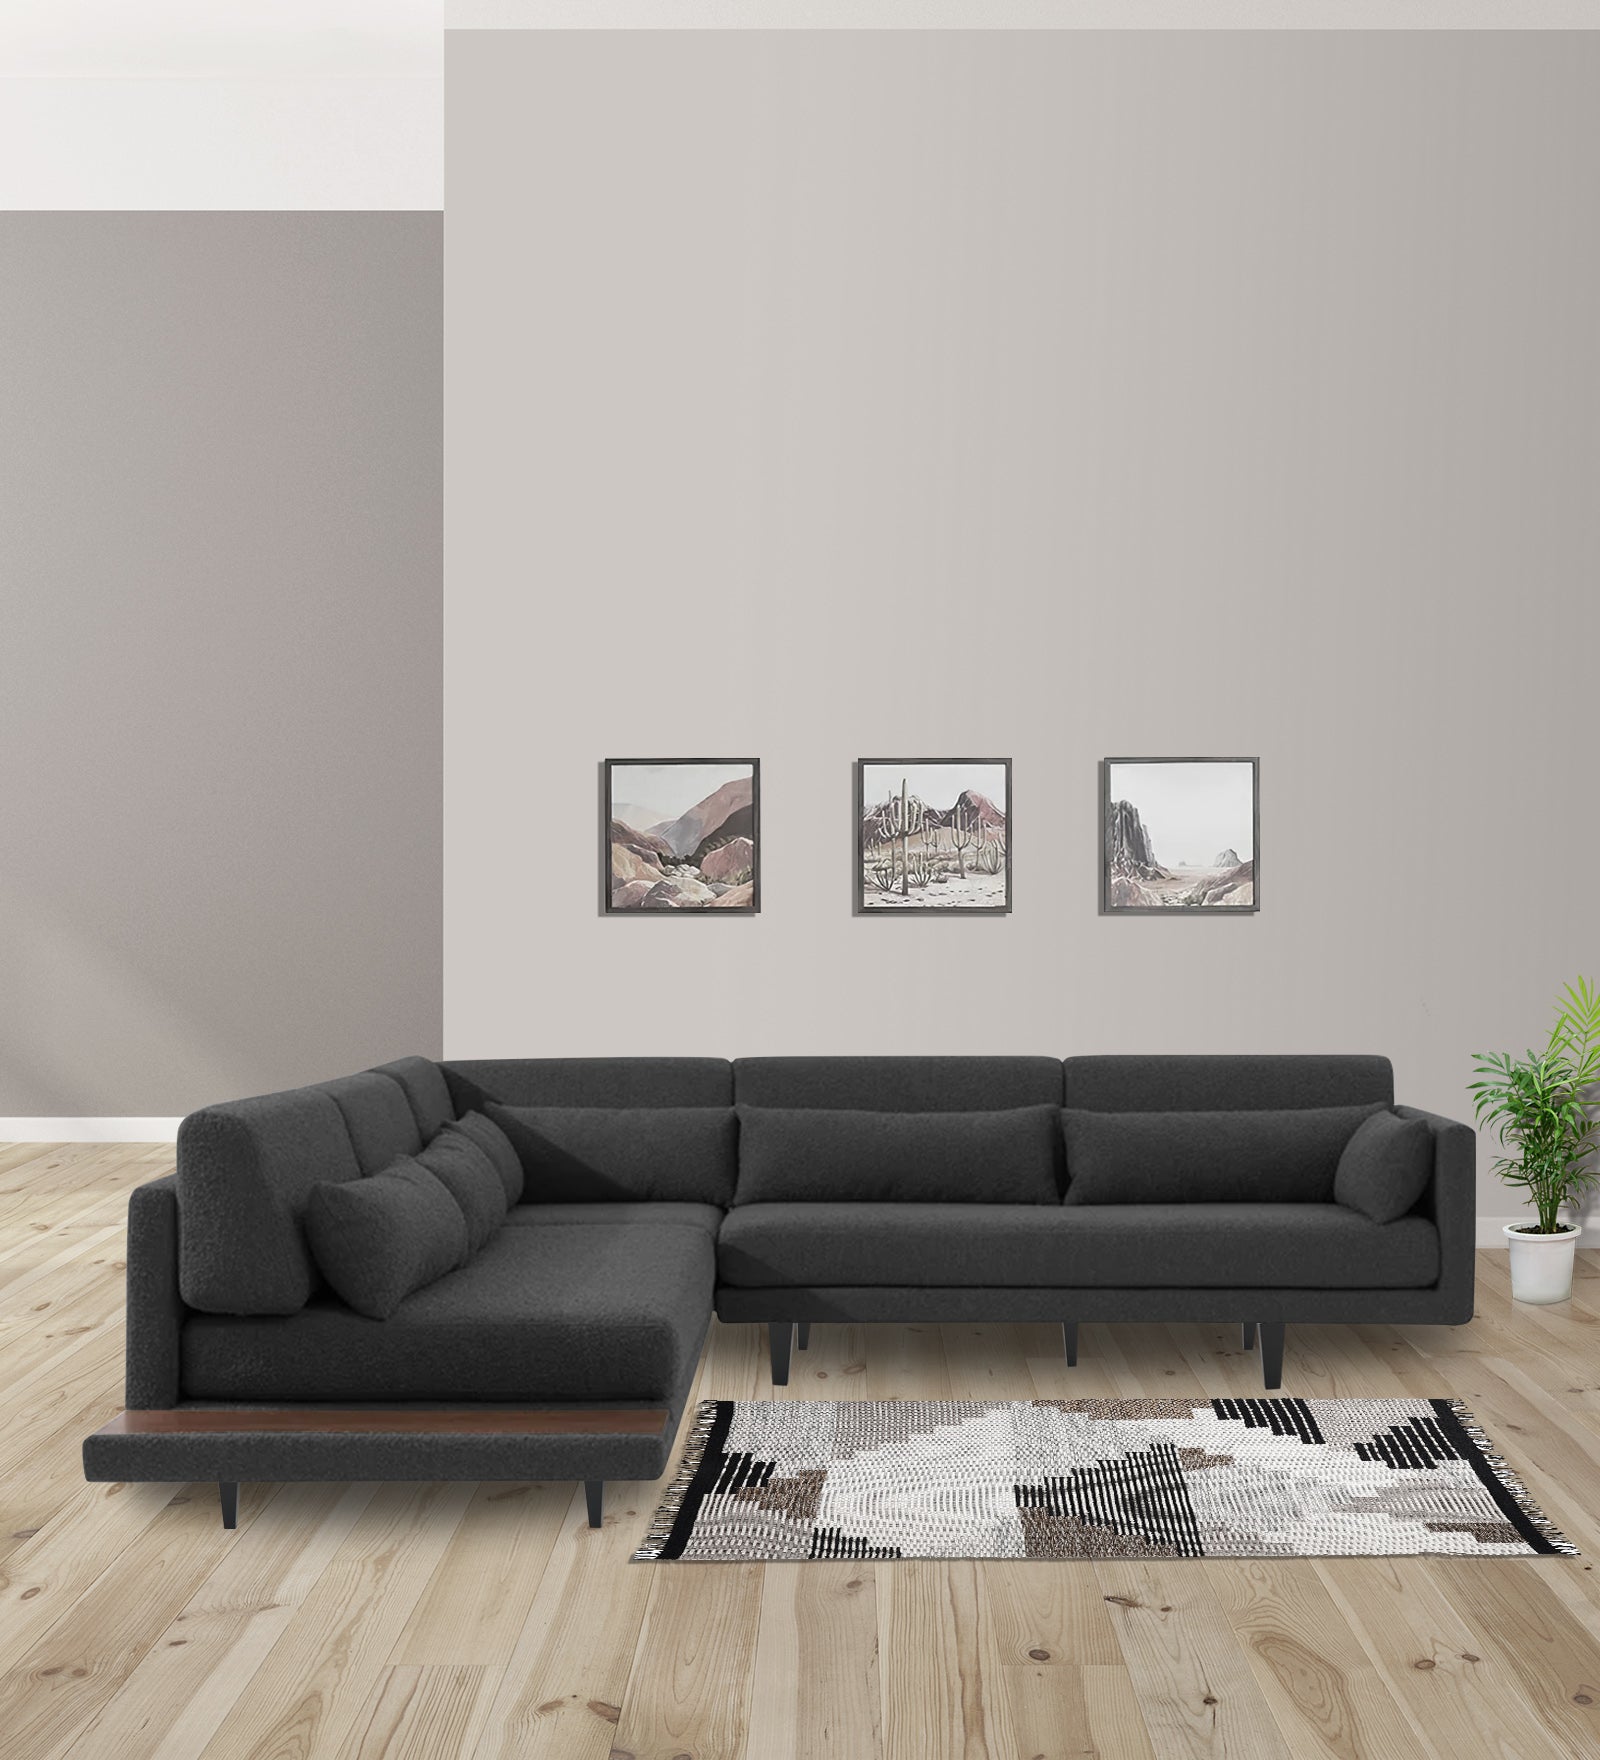 Malta Fabric 6 Seater RHS Sectional Sofa In Charcoal grey Colour